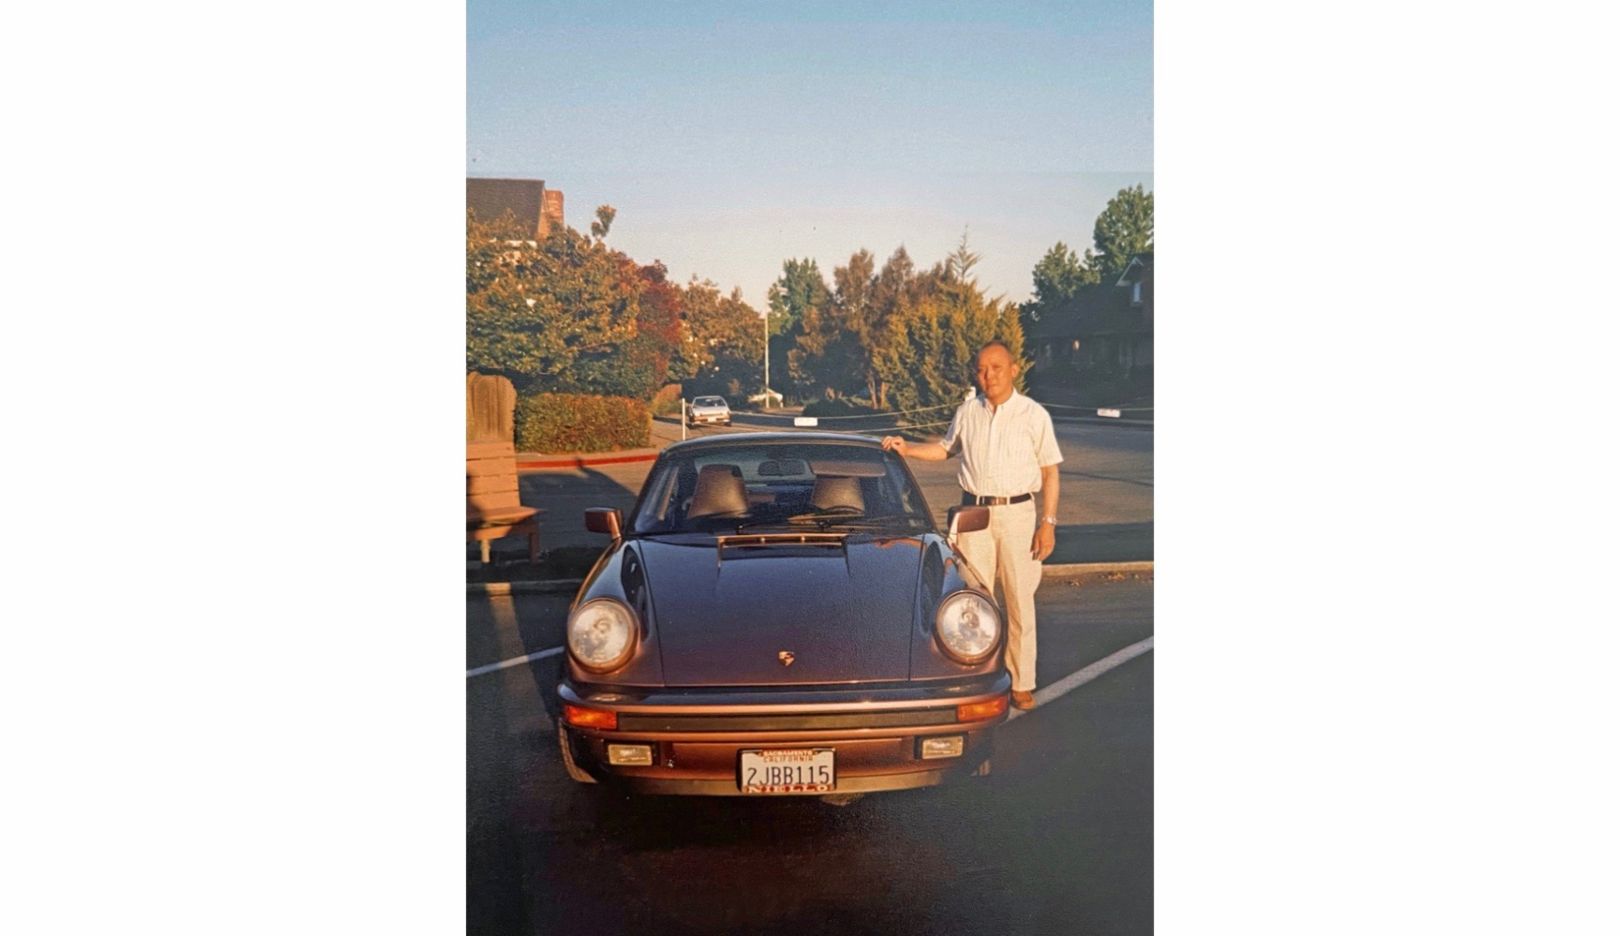 George Wu bought his first Porsche 911 upon retiring. His son, actor Daniel Wu, was twelve at the time and was allowed to choose the color – he selected the rare Cassis Red.